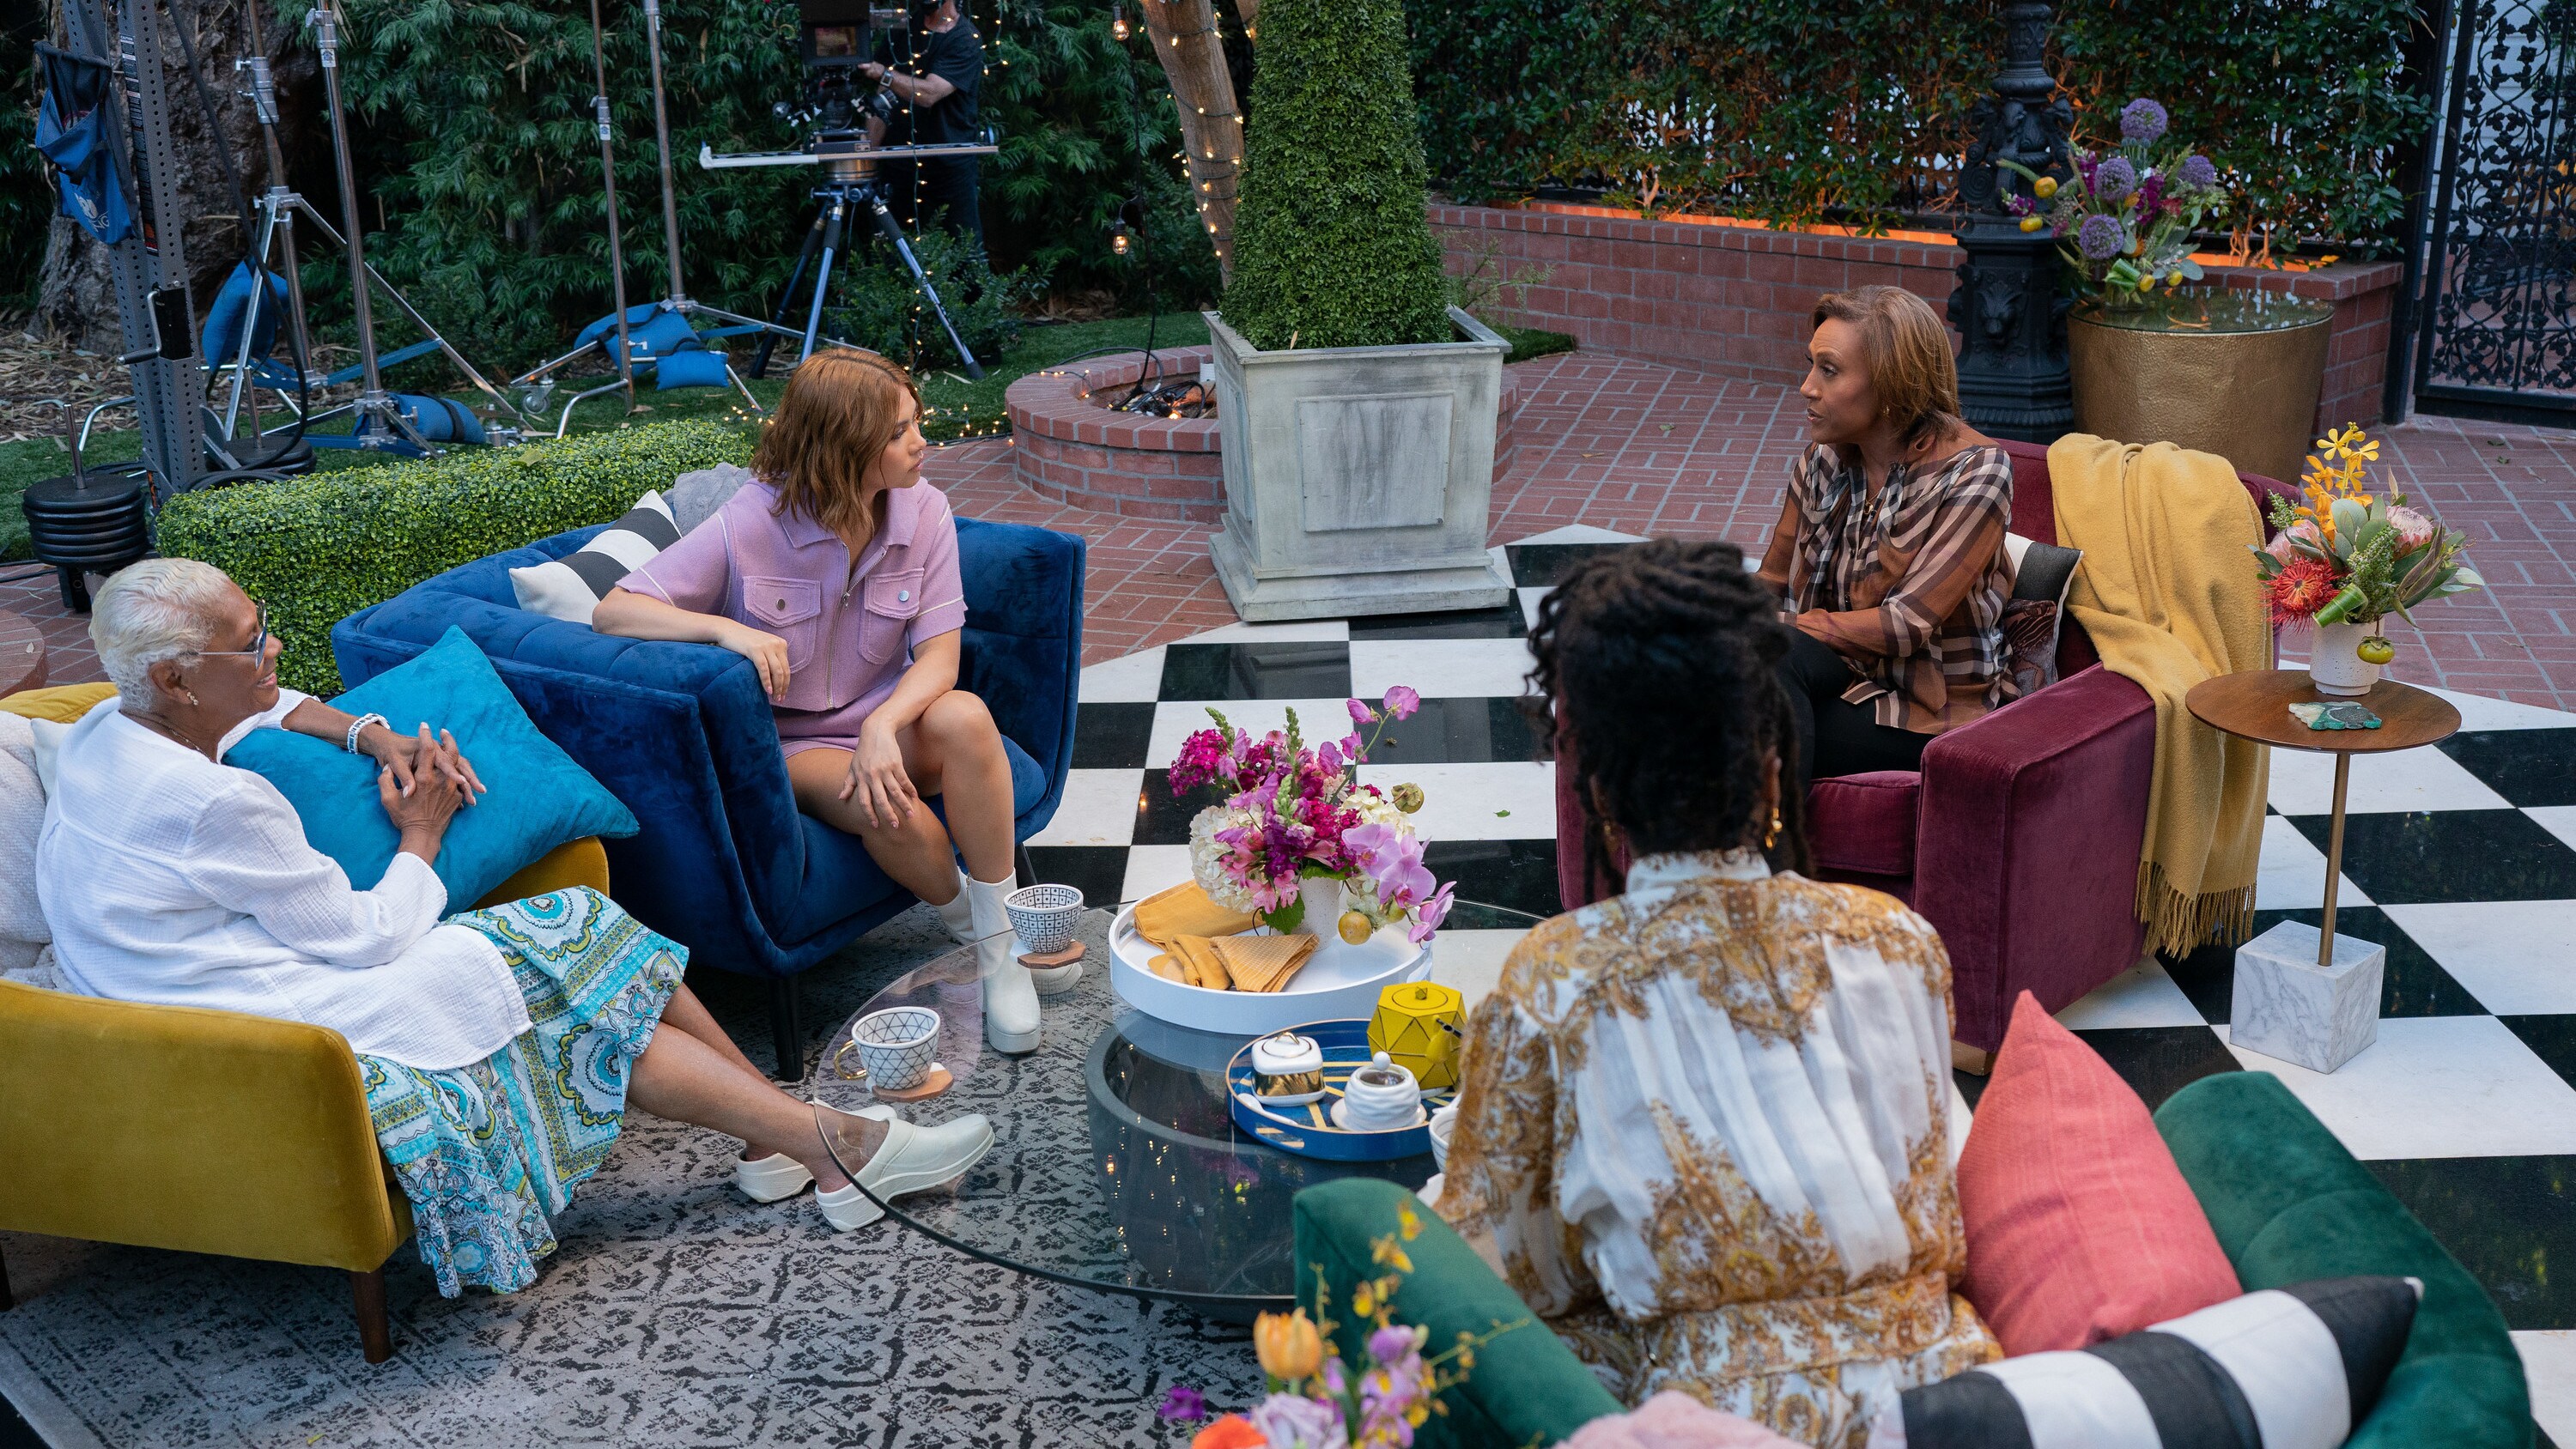 Dionne Warwick, Hayley Kiyoko, YaYa DaCosta, and Robin Roberts. In season 2 of Turning the Tables with Robin Roberts, Robin Roberts gets personal with a new group of Hollywood's iconic women as they bear witness to their incredible journeys on their path to purpose. (Disney/Ser Baffo)